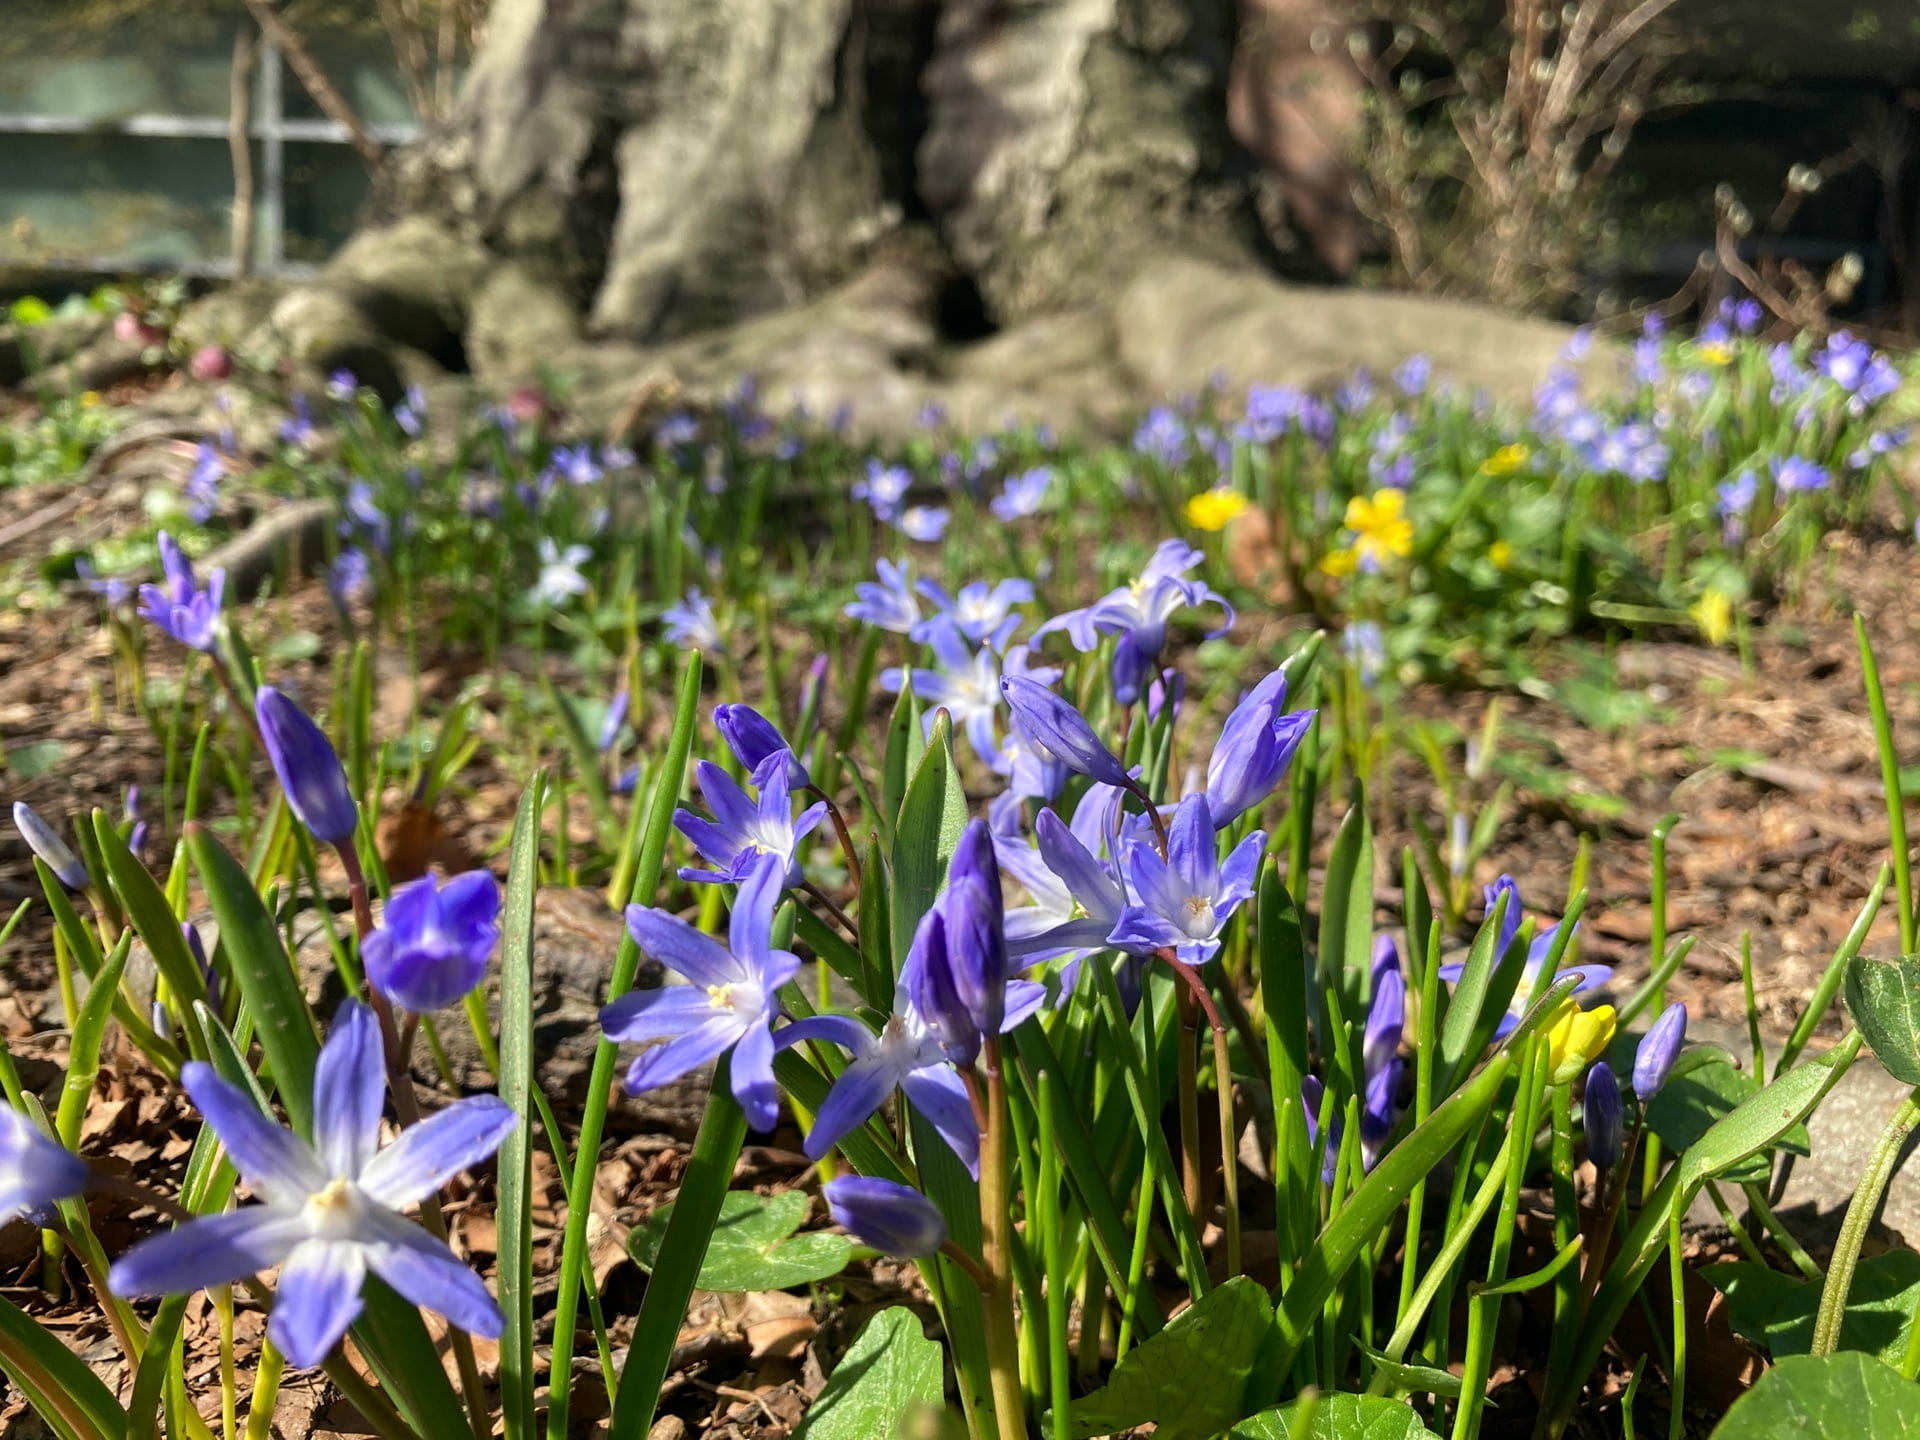 Chionodoxa forbesii blooms amongst the roots of Fagus grandifolia.